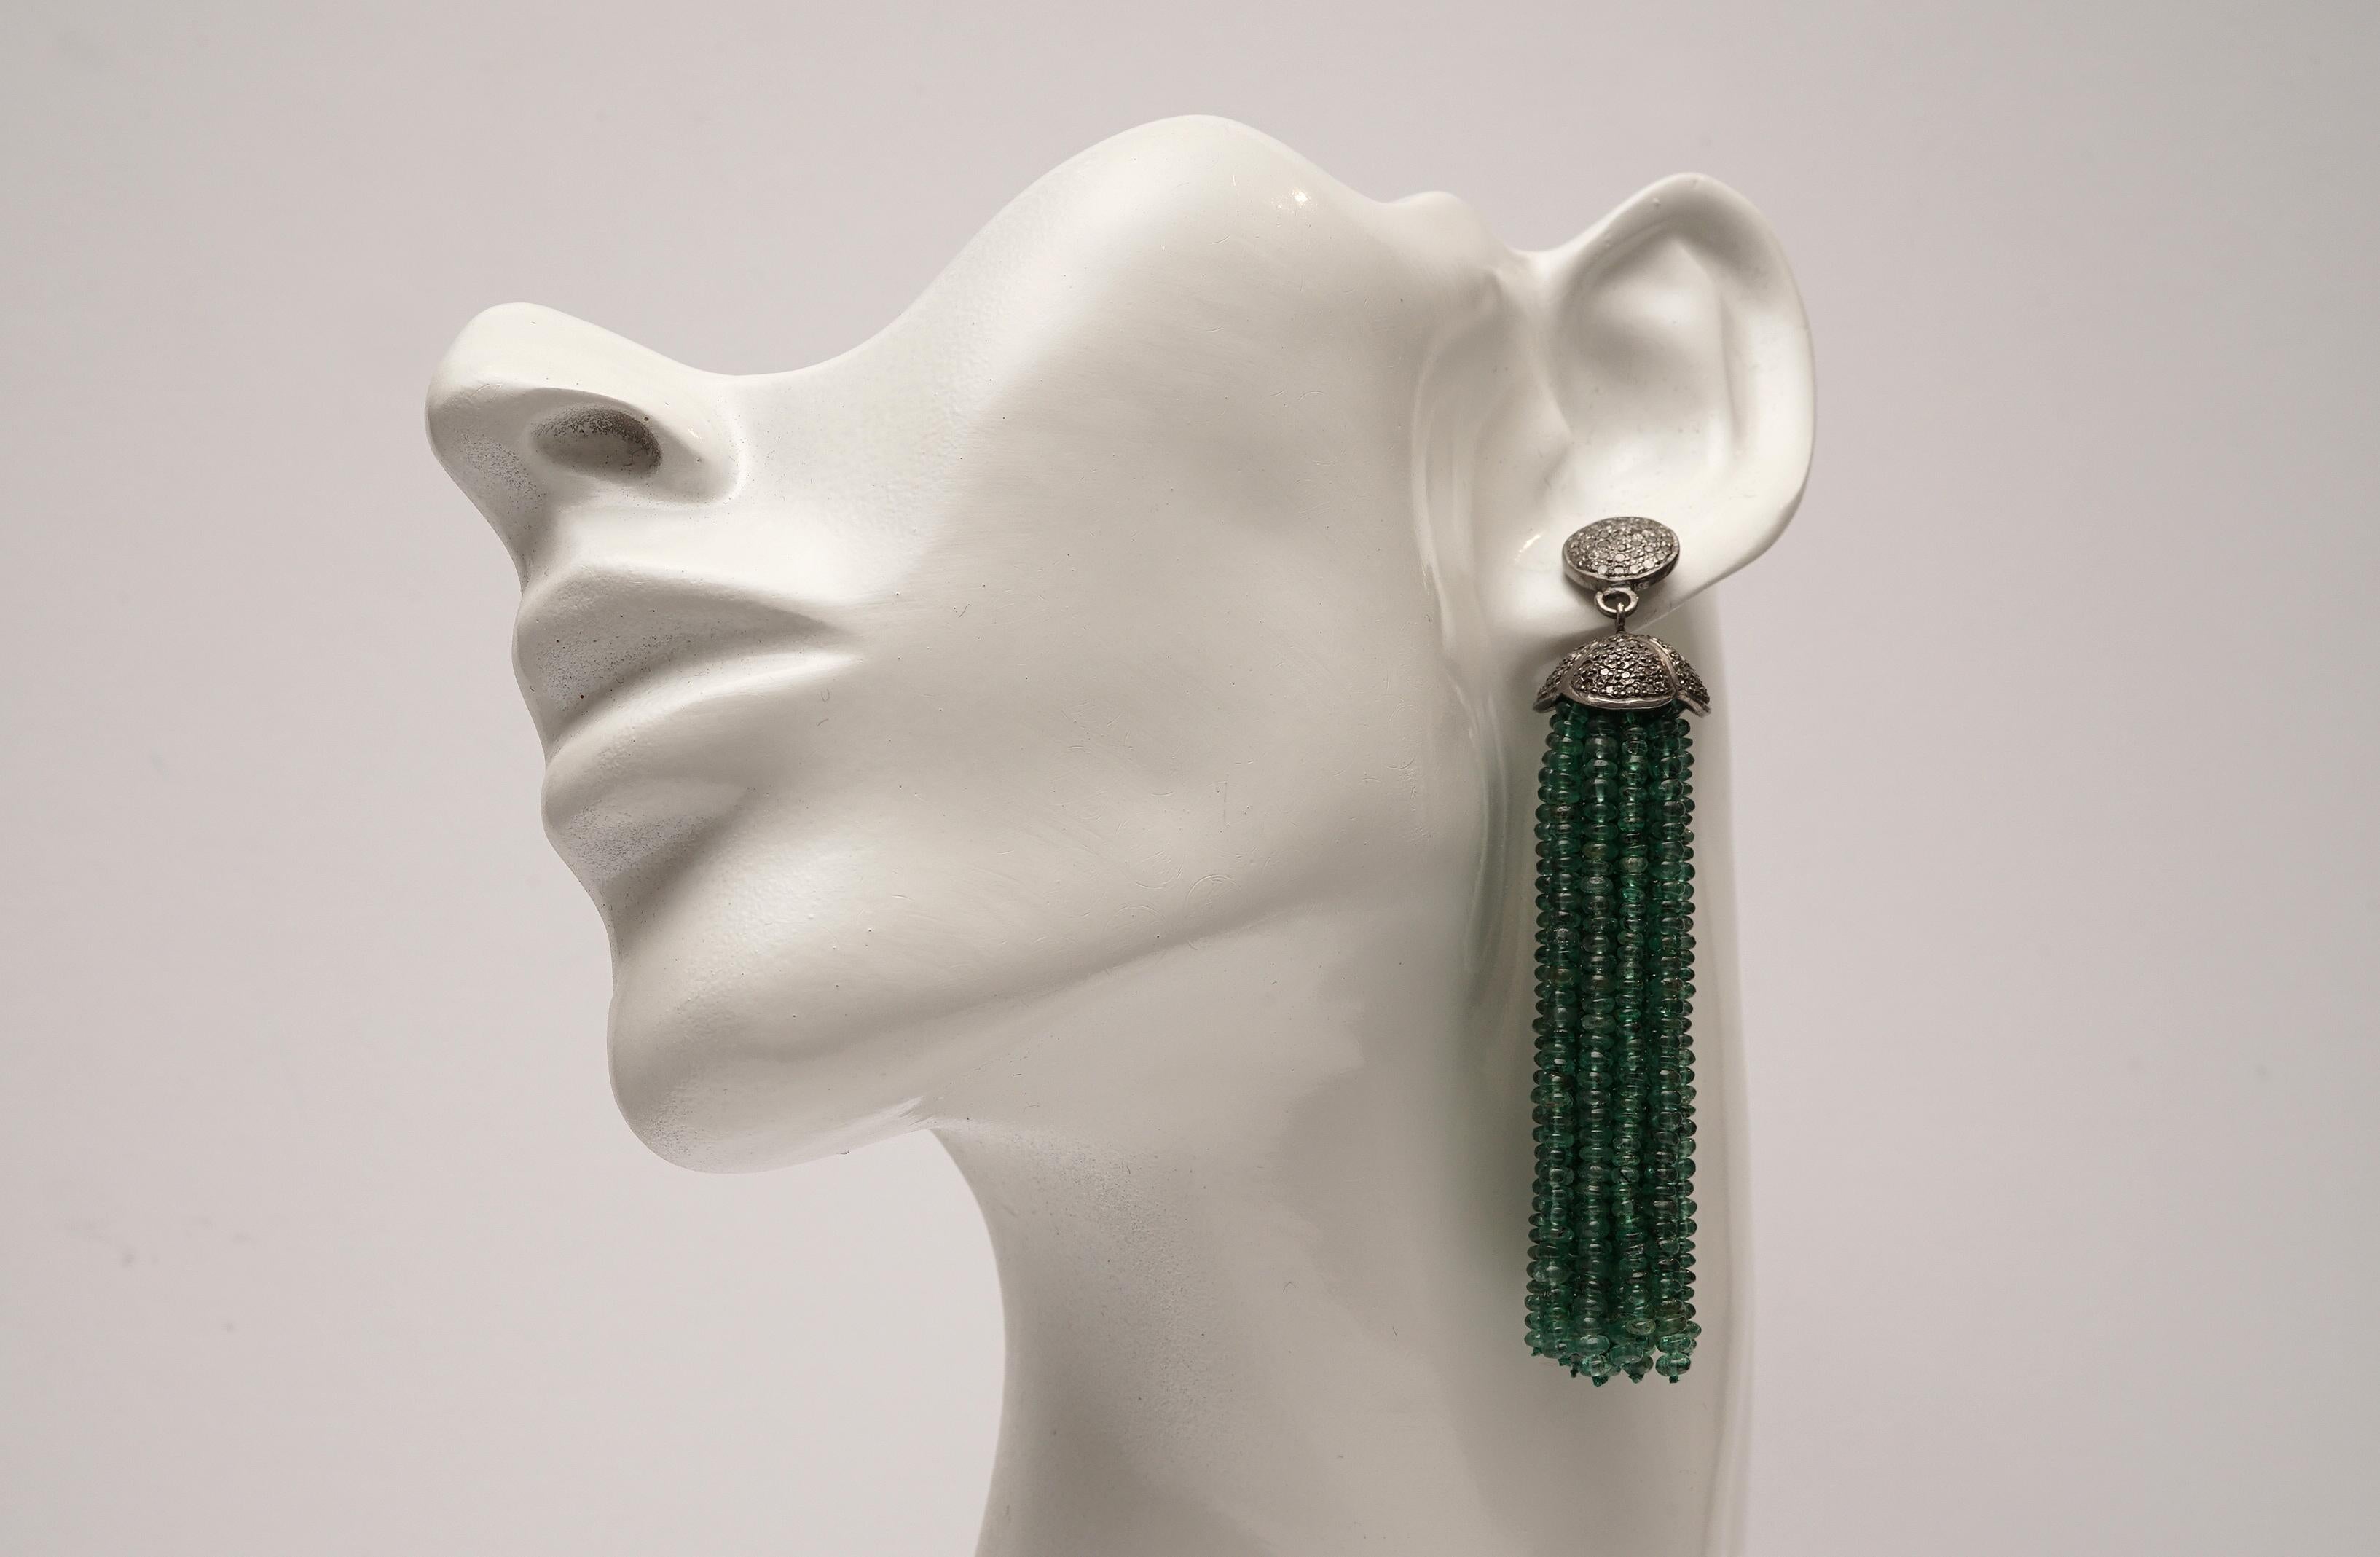 A tassel earring of 18 lines (each) of faceted Zambian emeralds with sterling silver end caps and earring stud set with diamonds.  Post is 18K gold for pierced ears.  Carat weight of diamonds is 1.25, emeralds are 116.90 carats.